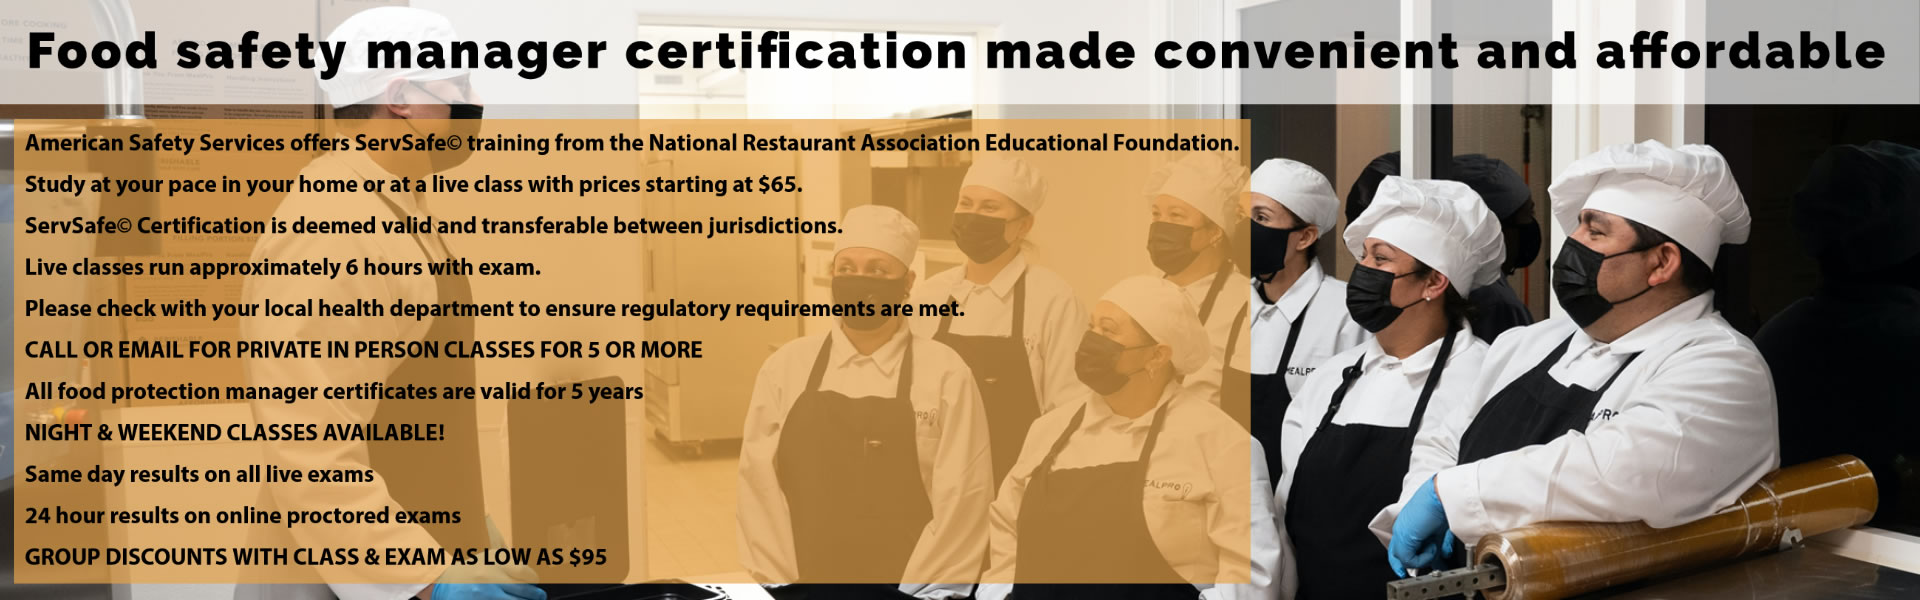 Food safety manager certification